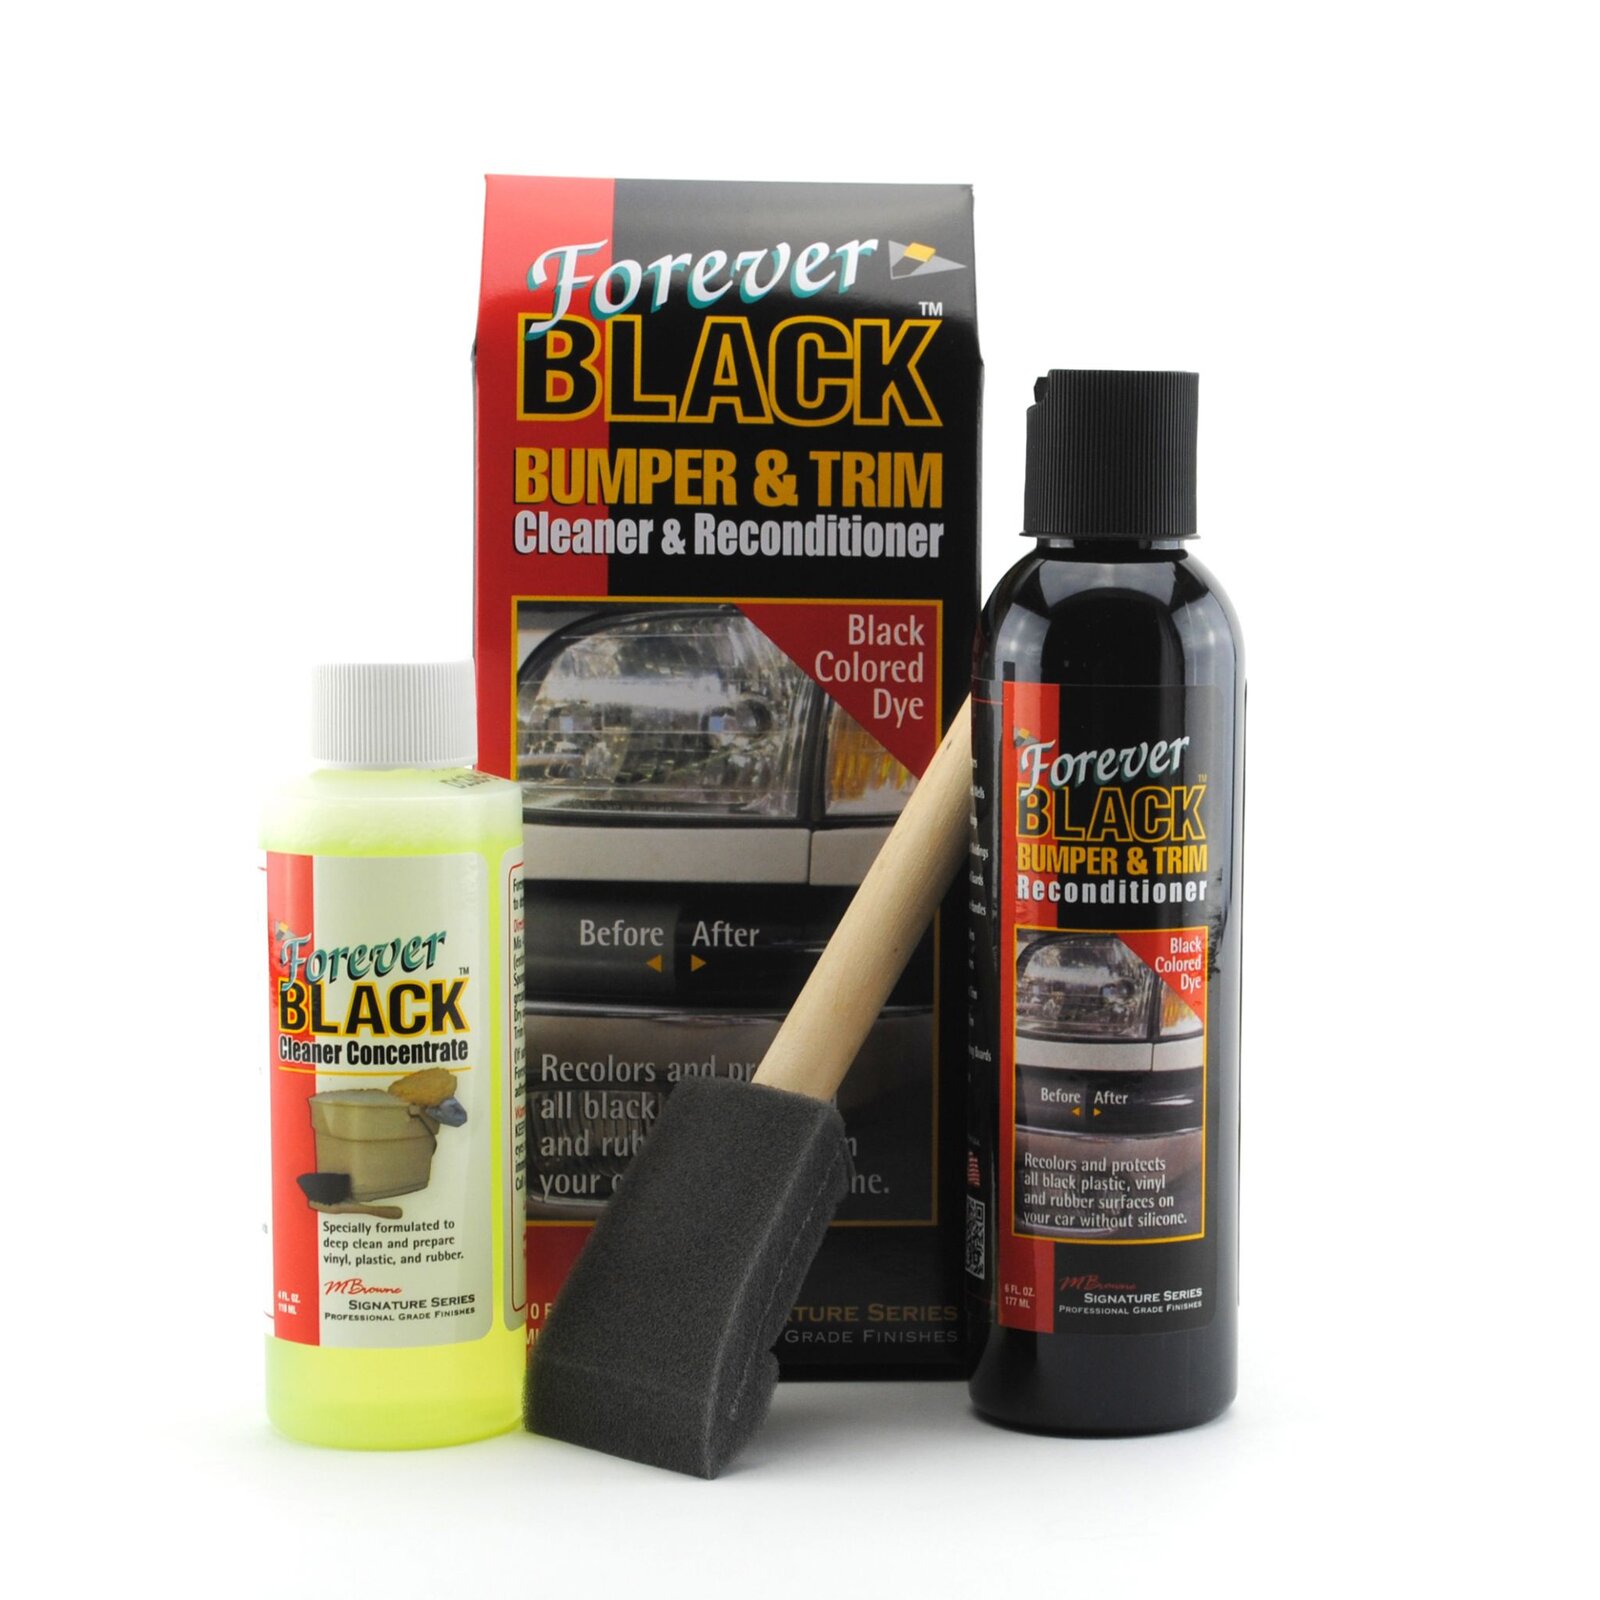 forever-black-dye-kit-trim-and-bumpers-415-1-p.jpg